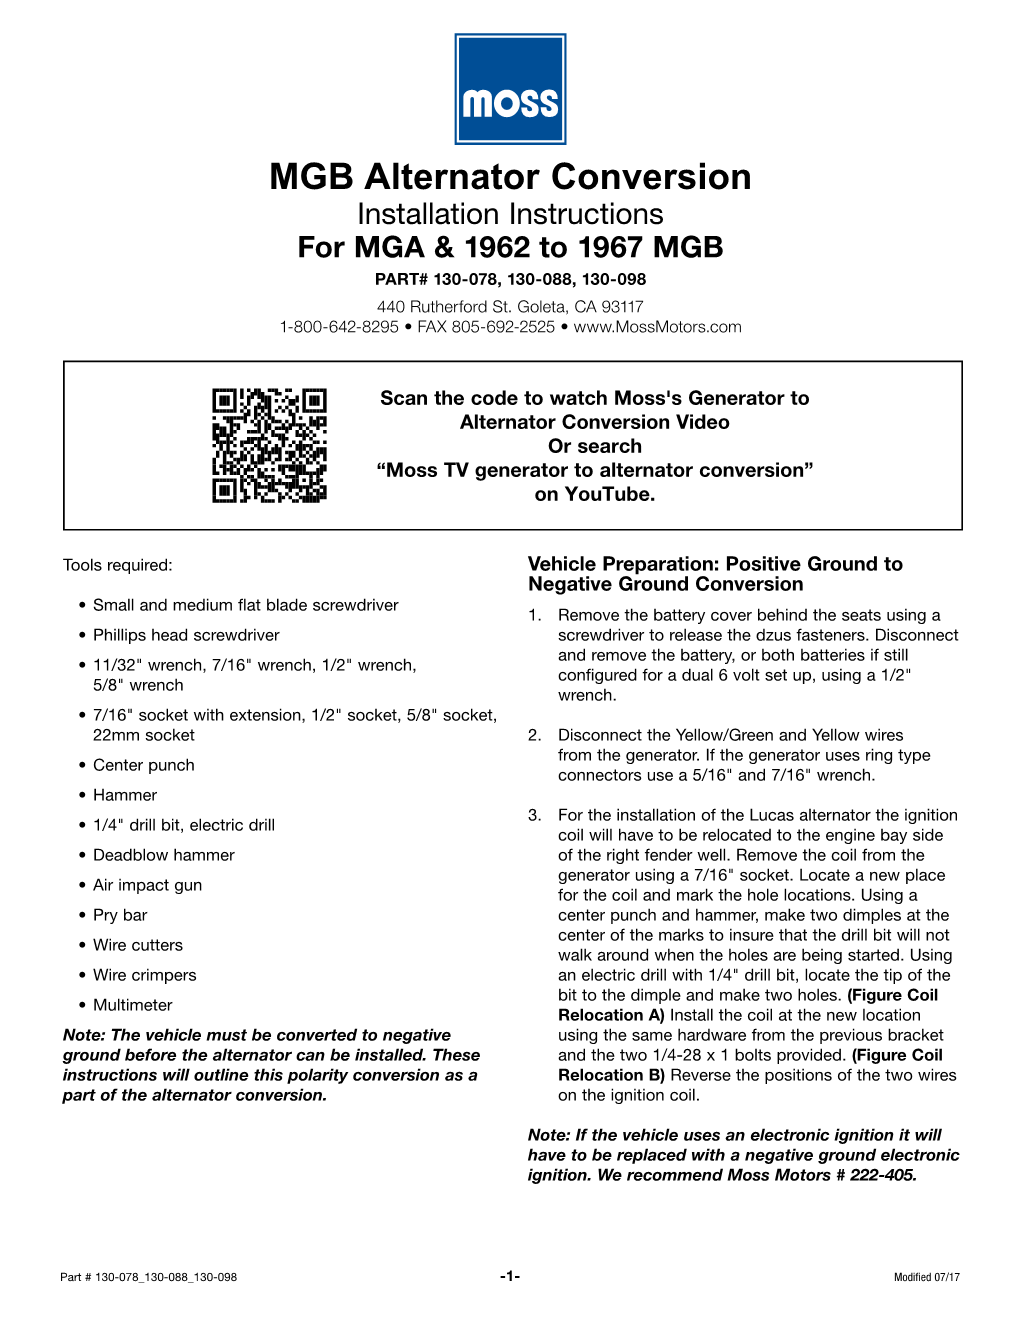 MGB Alternator Conversion Installation Instructions for MGA & 1962 to 1967 MGB PART# 130-078, 130-088, 130-098 440 Rutherford St